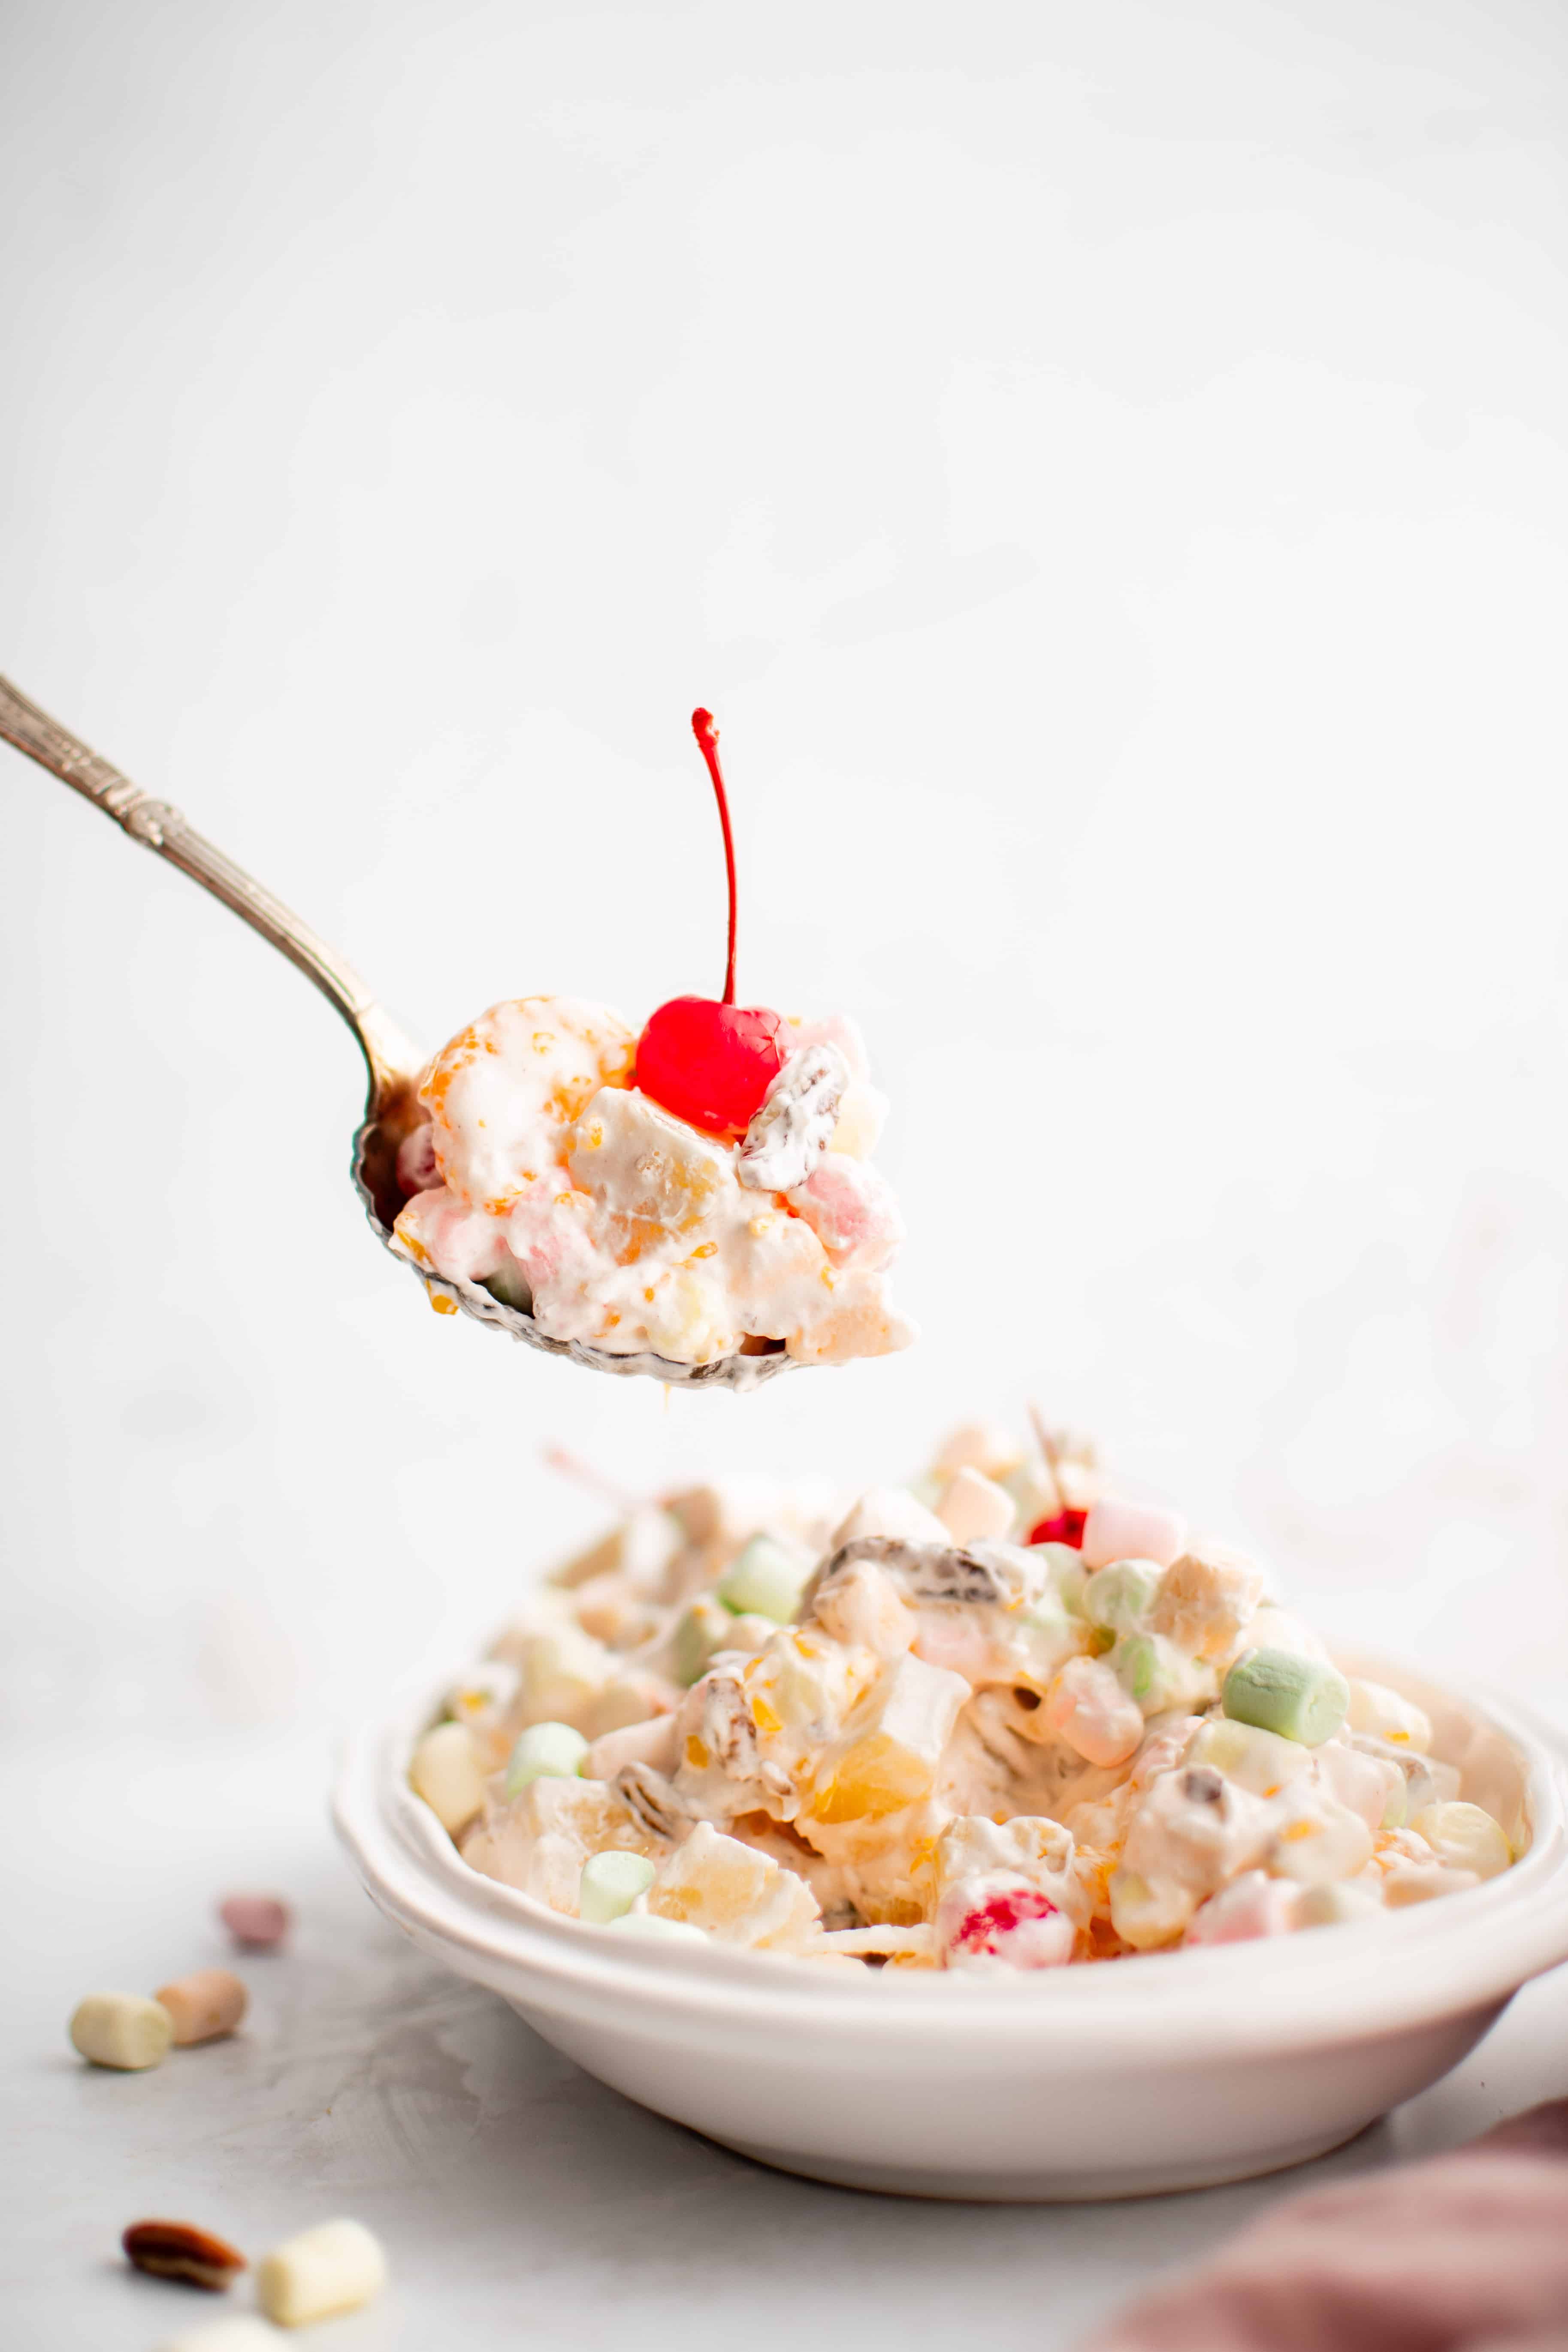 Large spoonful of ambrosia salad scooped from a large oval platter filled with mini marshmallows, pineapple, mandarin oranges, grapes, maraschino cherries, pecans, and shredded coconut in a creamy whipped topping.